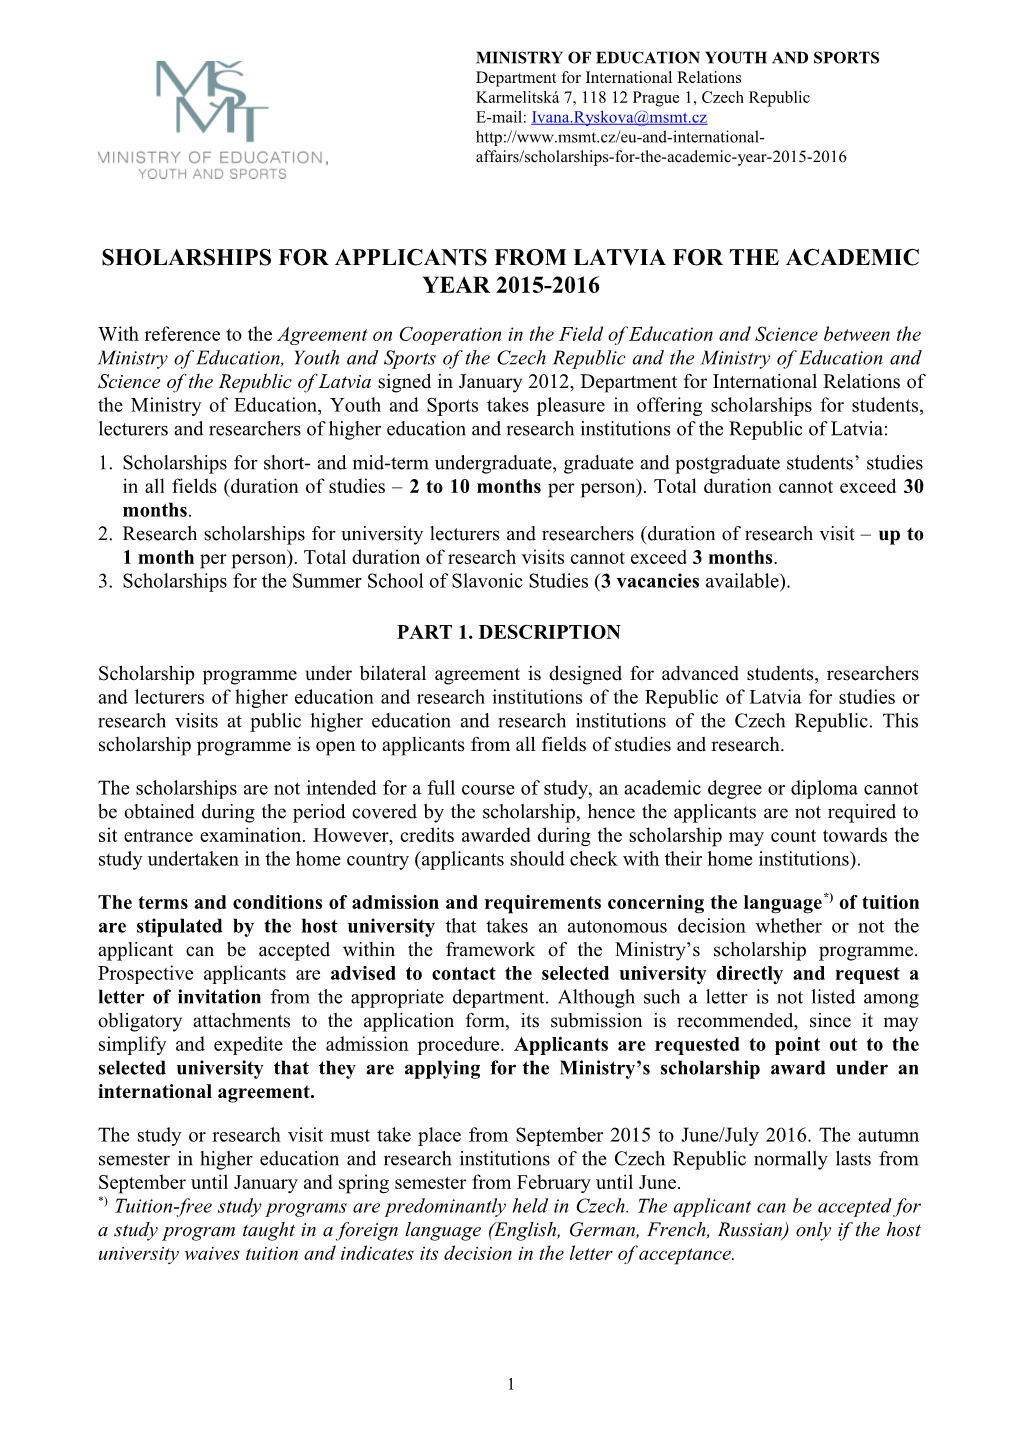 Sholarships for Applicants from Latvia for the Academic Year 2015-2016